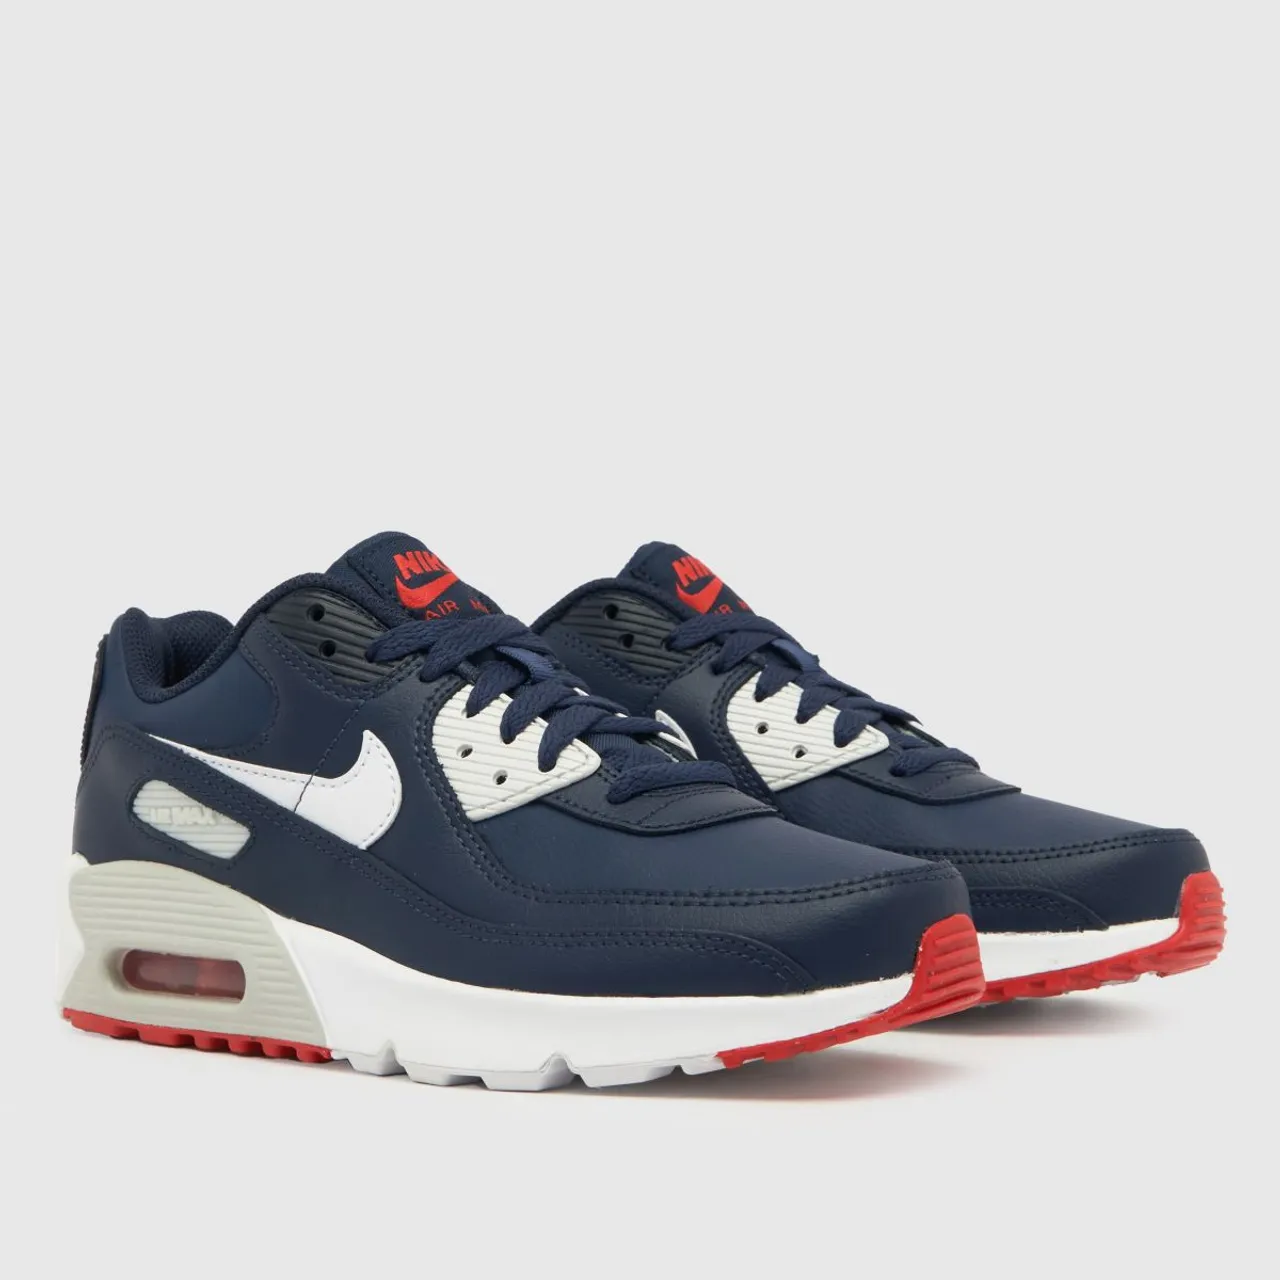 Nike Navy Air Max 90 Ltr Boys Youth Trainers